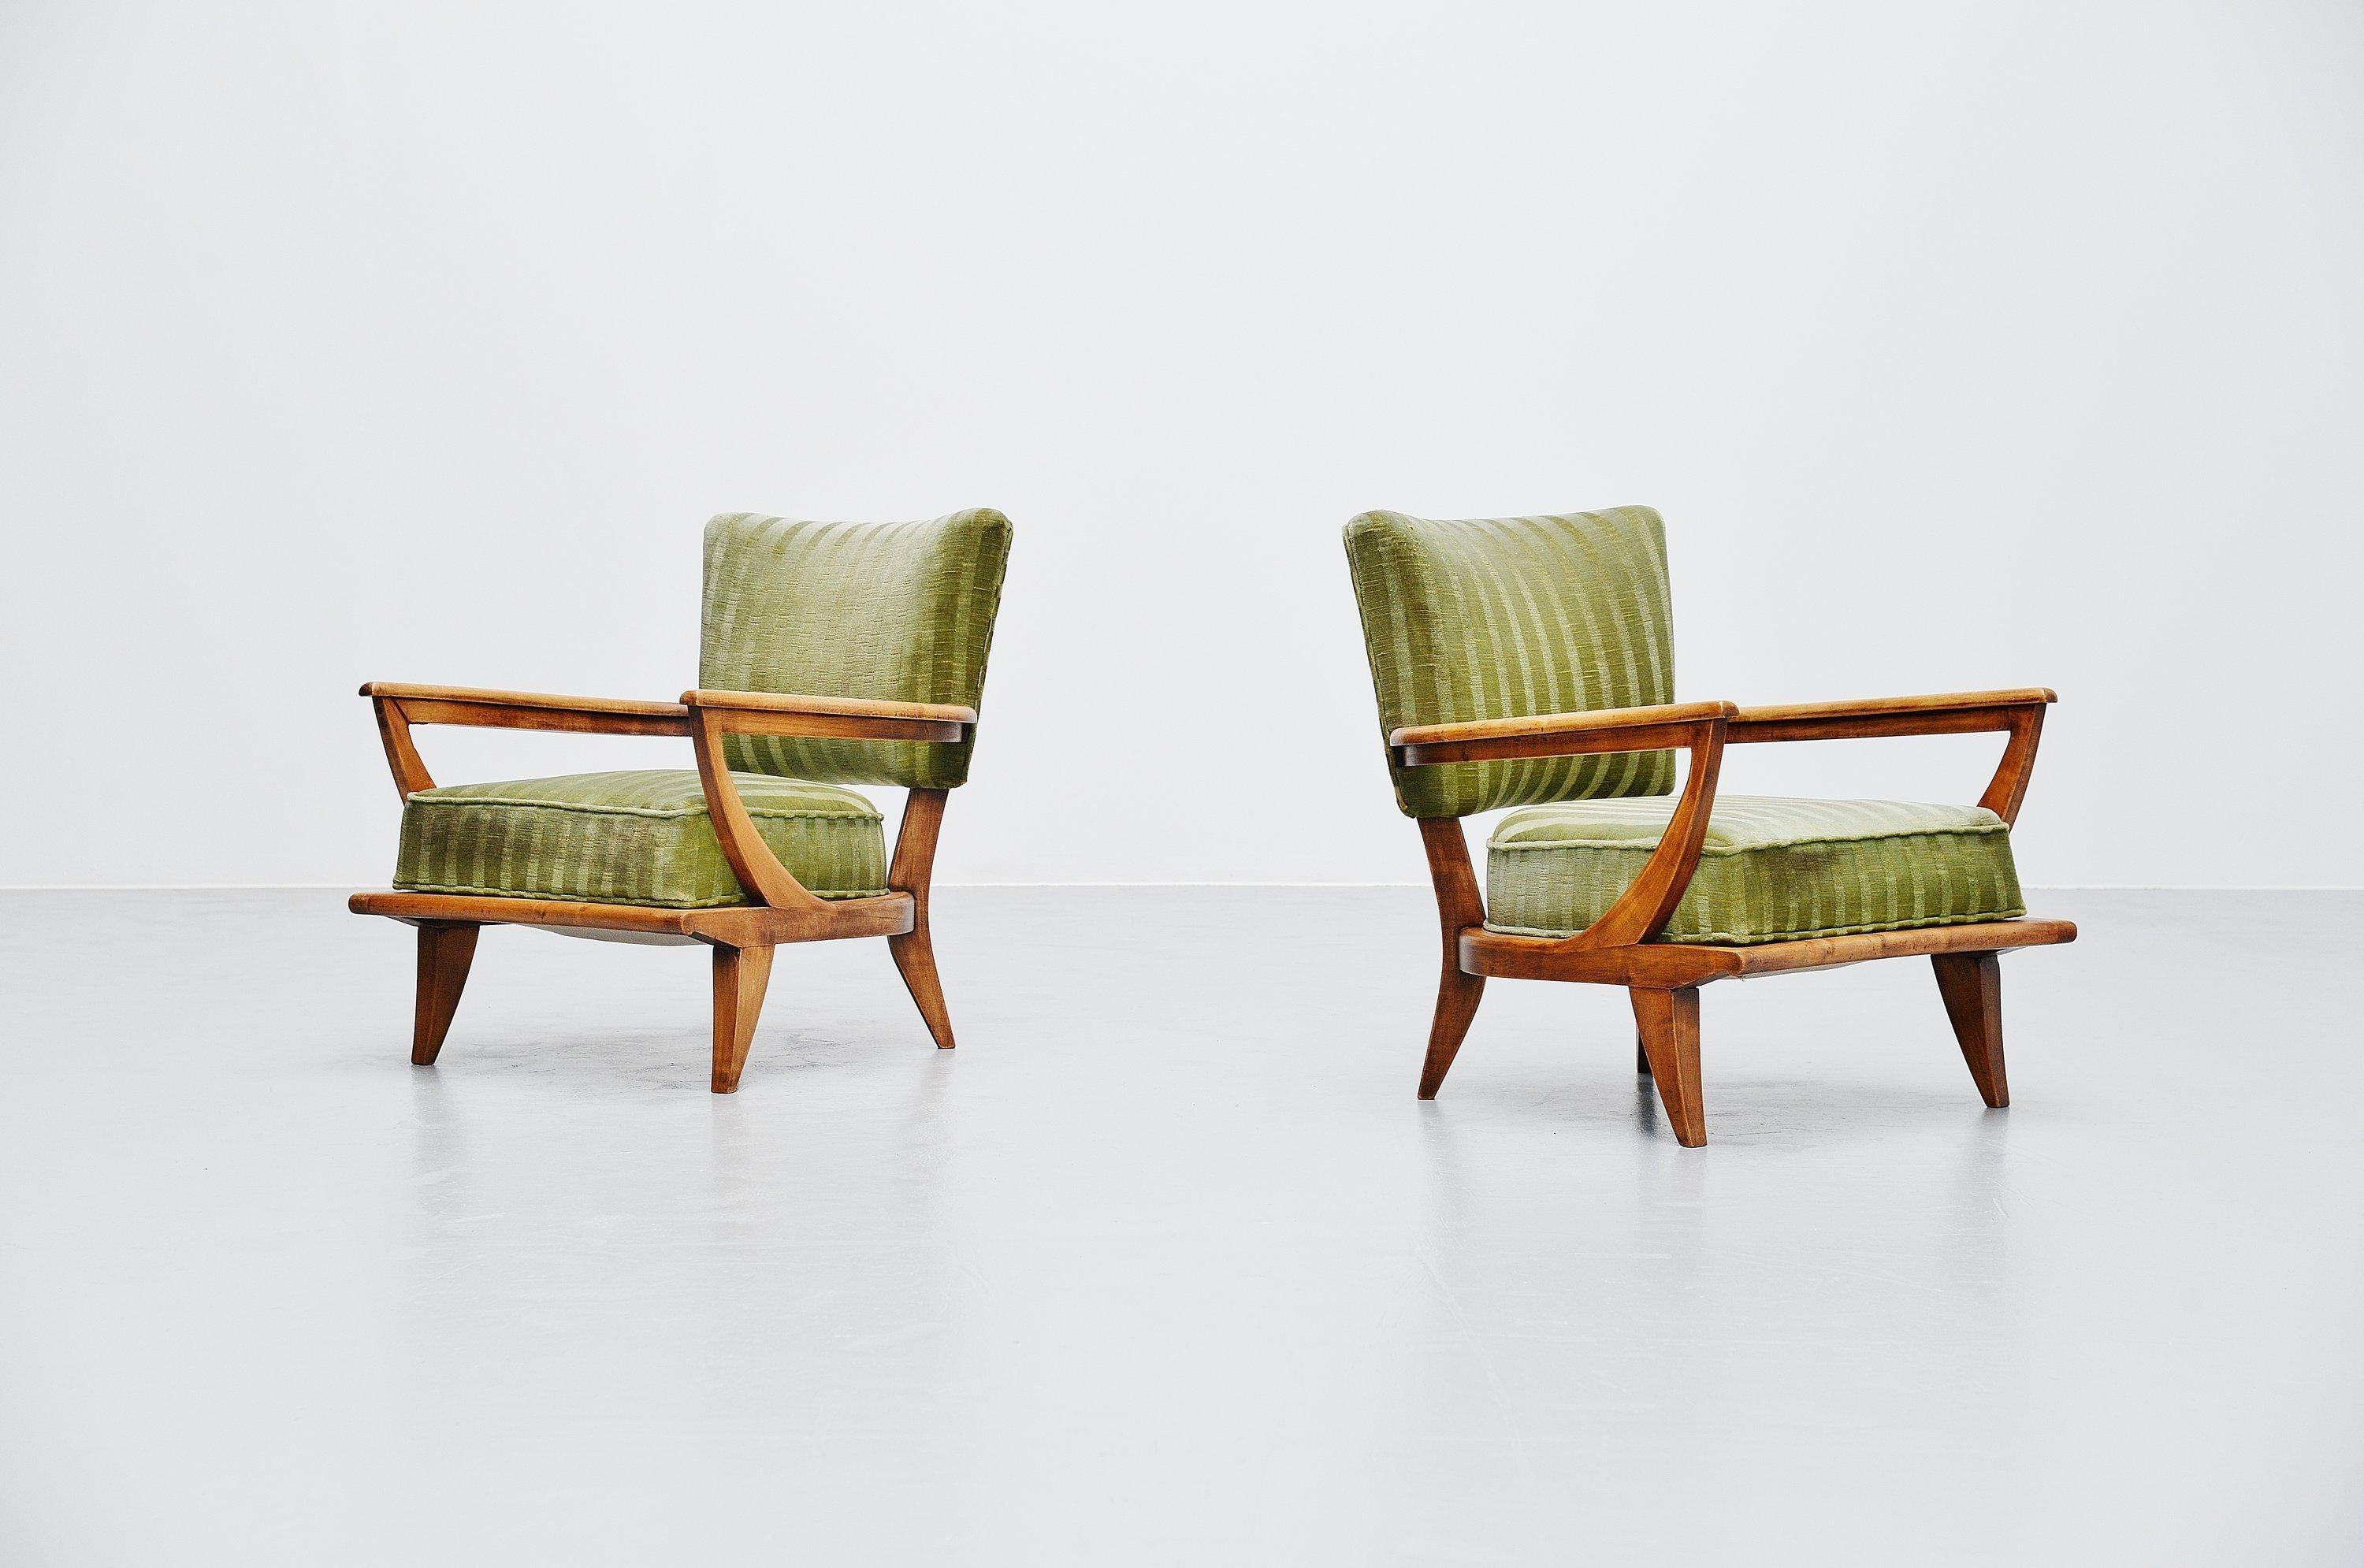 Fabulous pair of lounge chairs model SK40 designed by Etienne-Henri Martin and manufactured by Steiner, France, 1952. These chairs have a solid beech frame with amazing patina from age. They also still have their original striped mohair upholstery